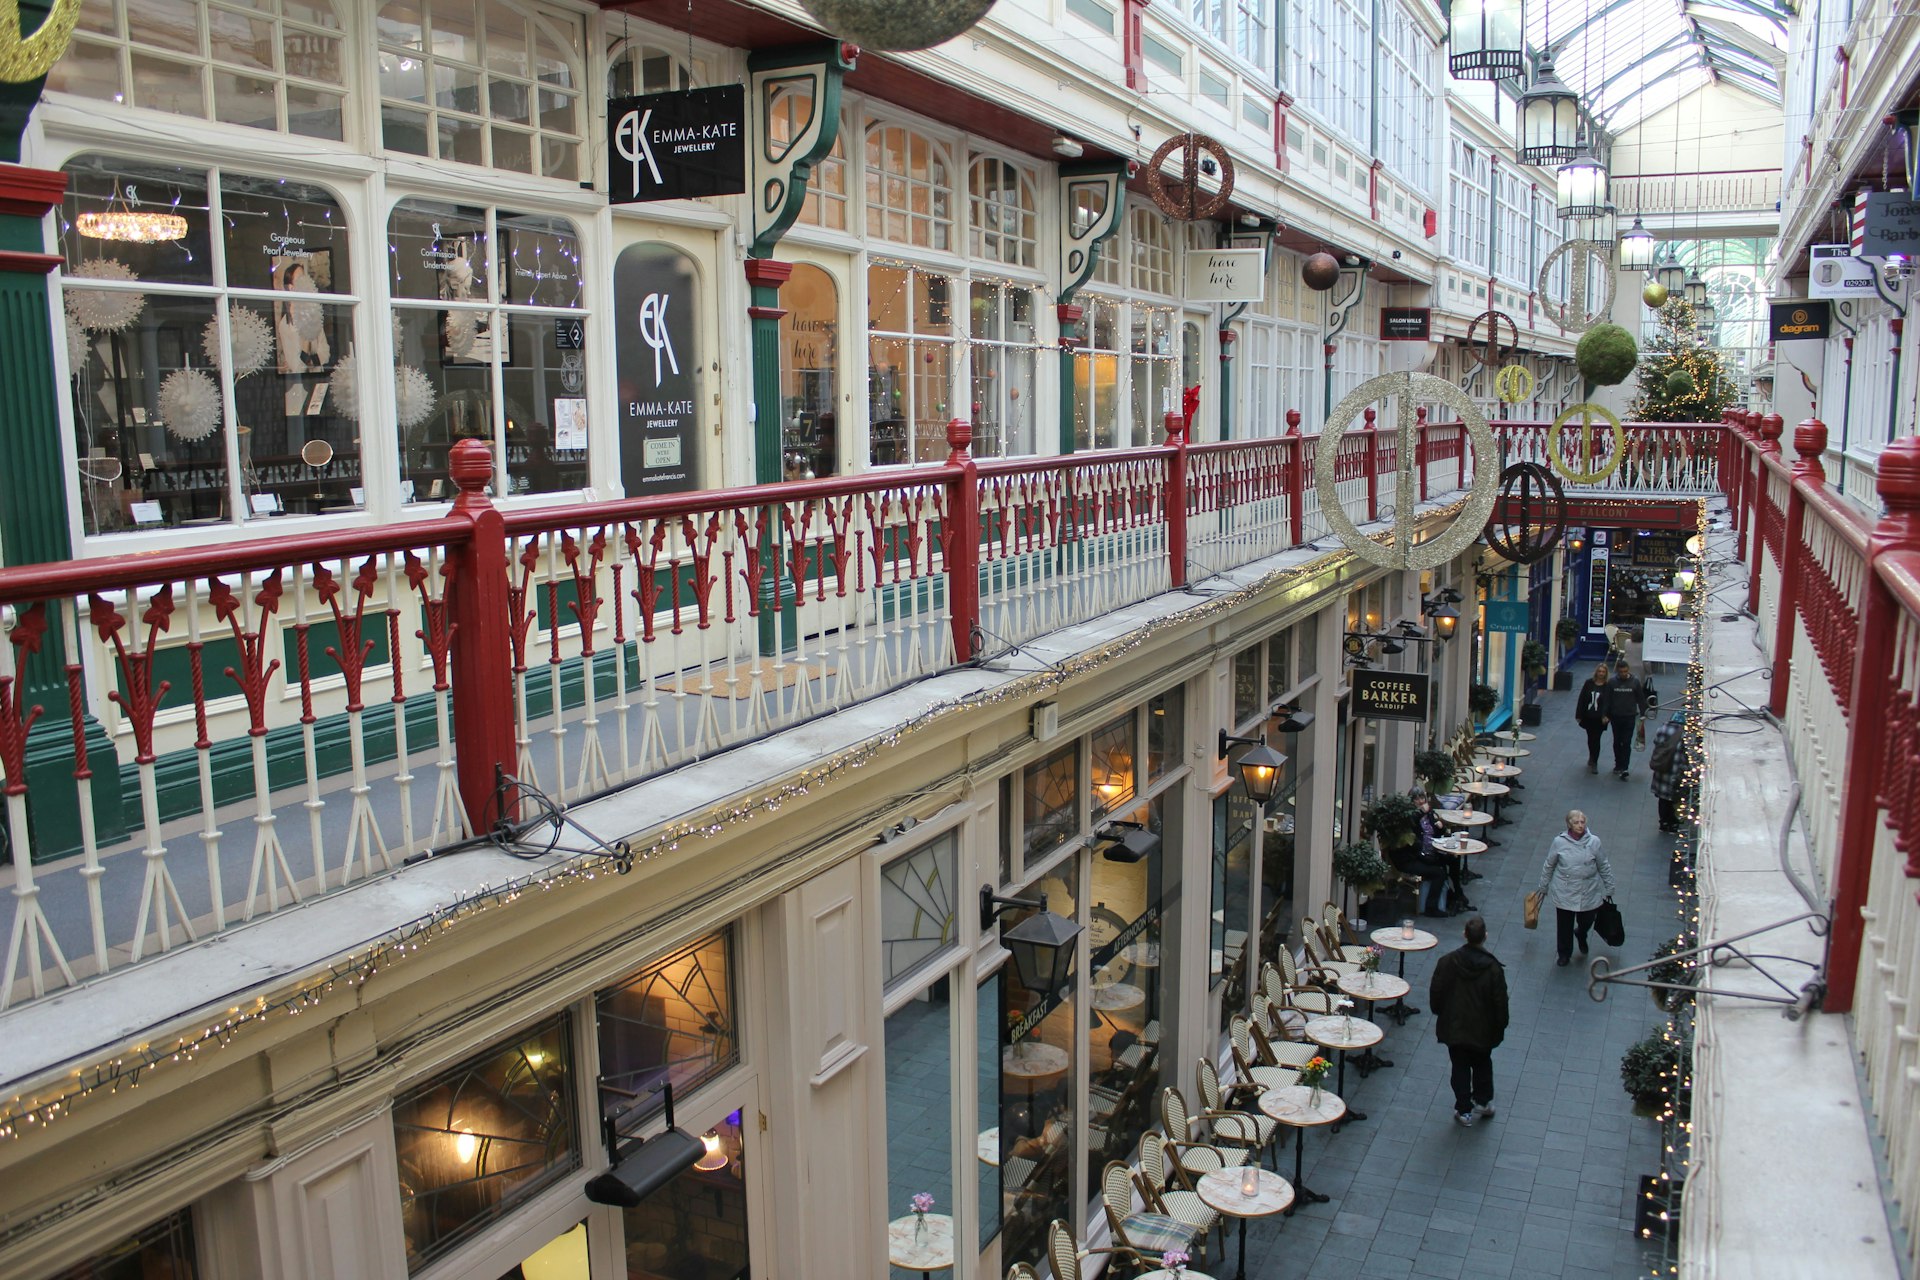 A view looking down on the narrow walkway that runs through the centre of Cardiff's Castle Arcade. The shopping arcade is more than 100 years old and is lined with small shops and businesses.